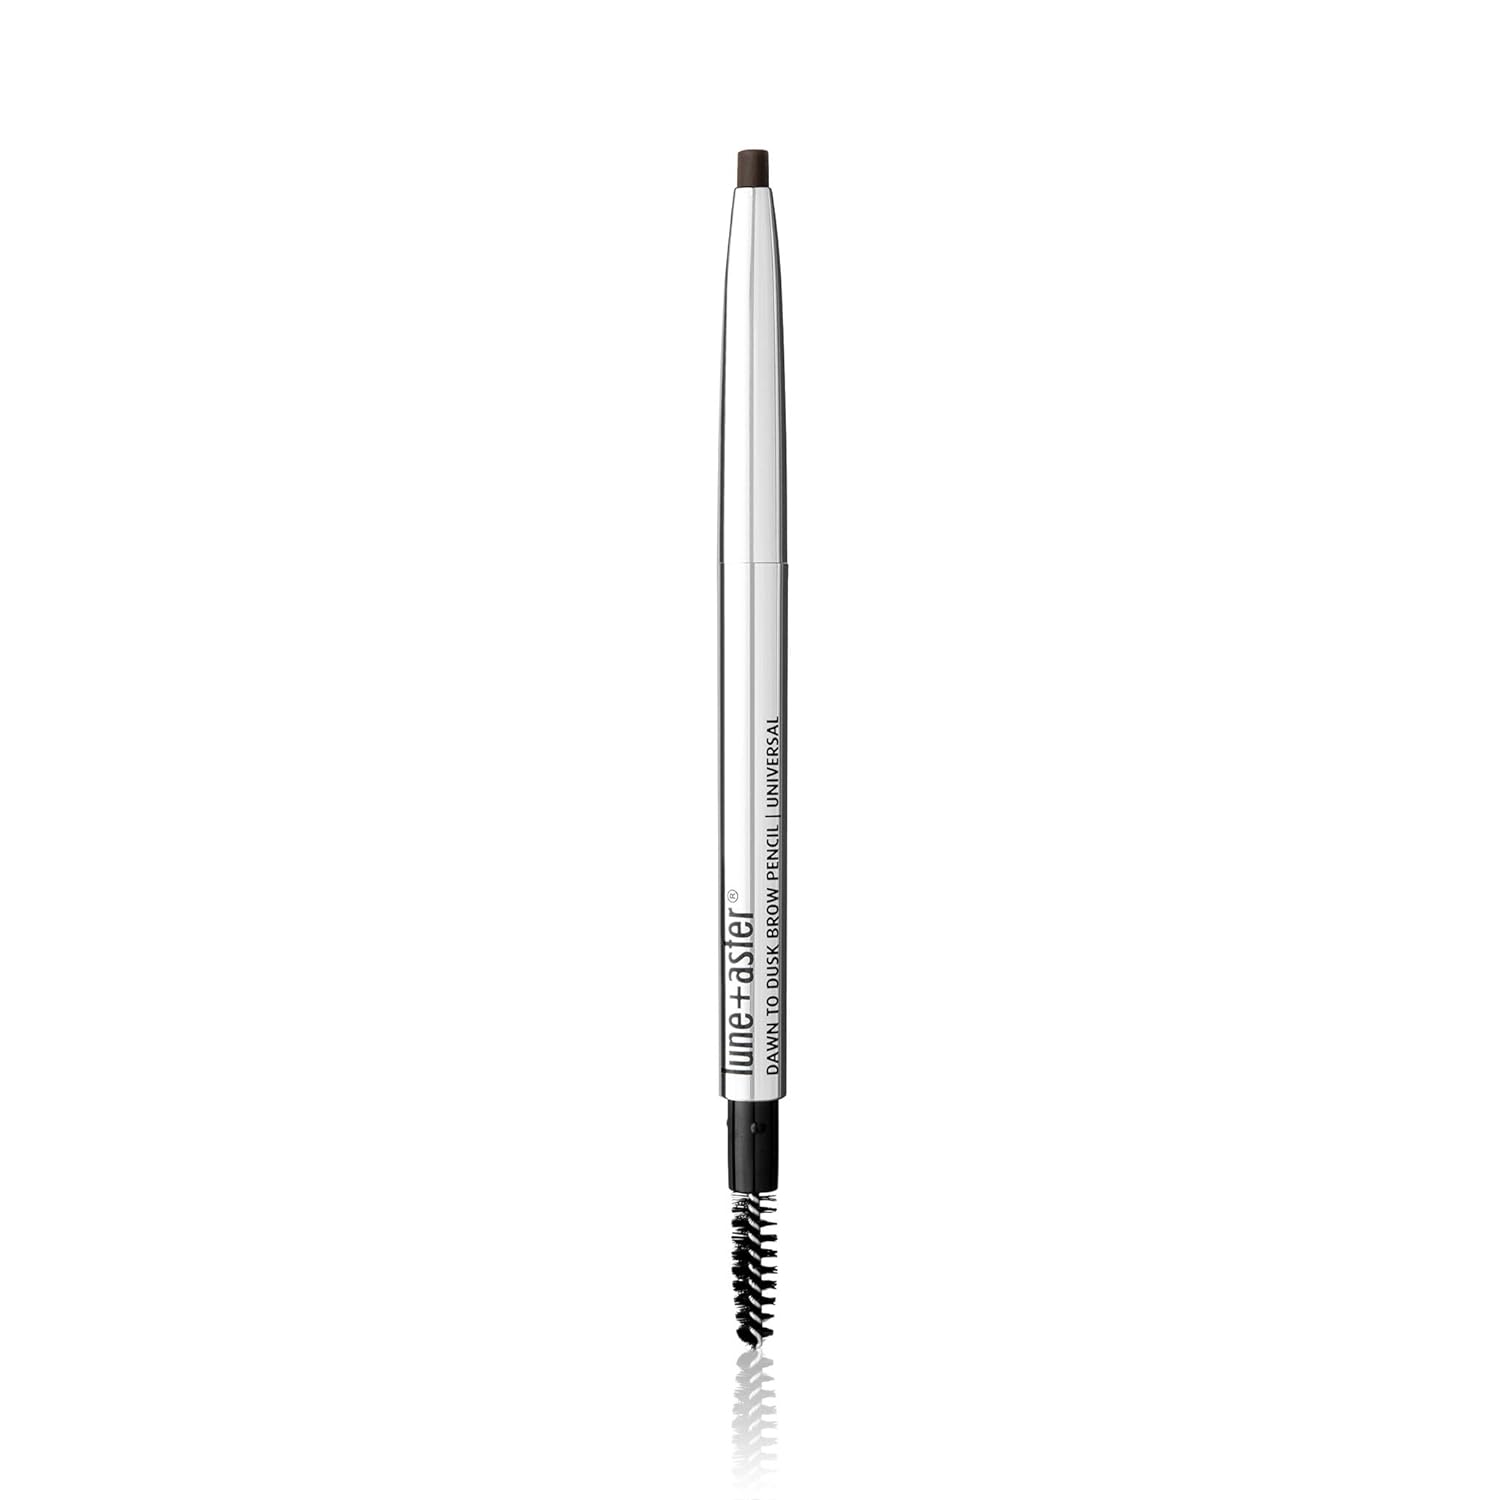 Lune+Aster Dawn to Dusk Brow Pencil- Universal, vegan brow pencil effortlessly shapes, fills and defines